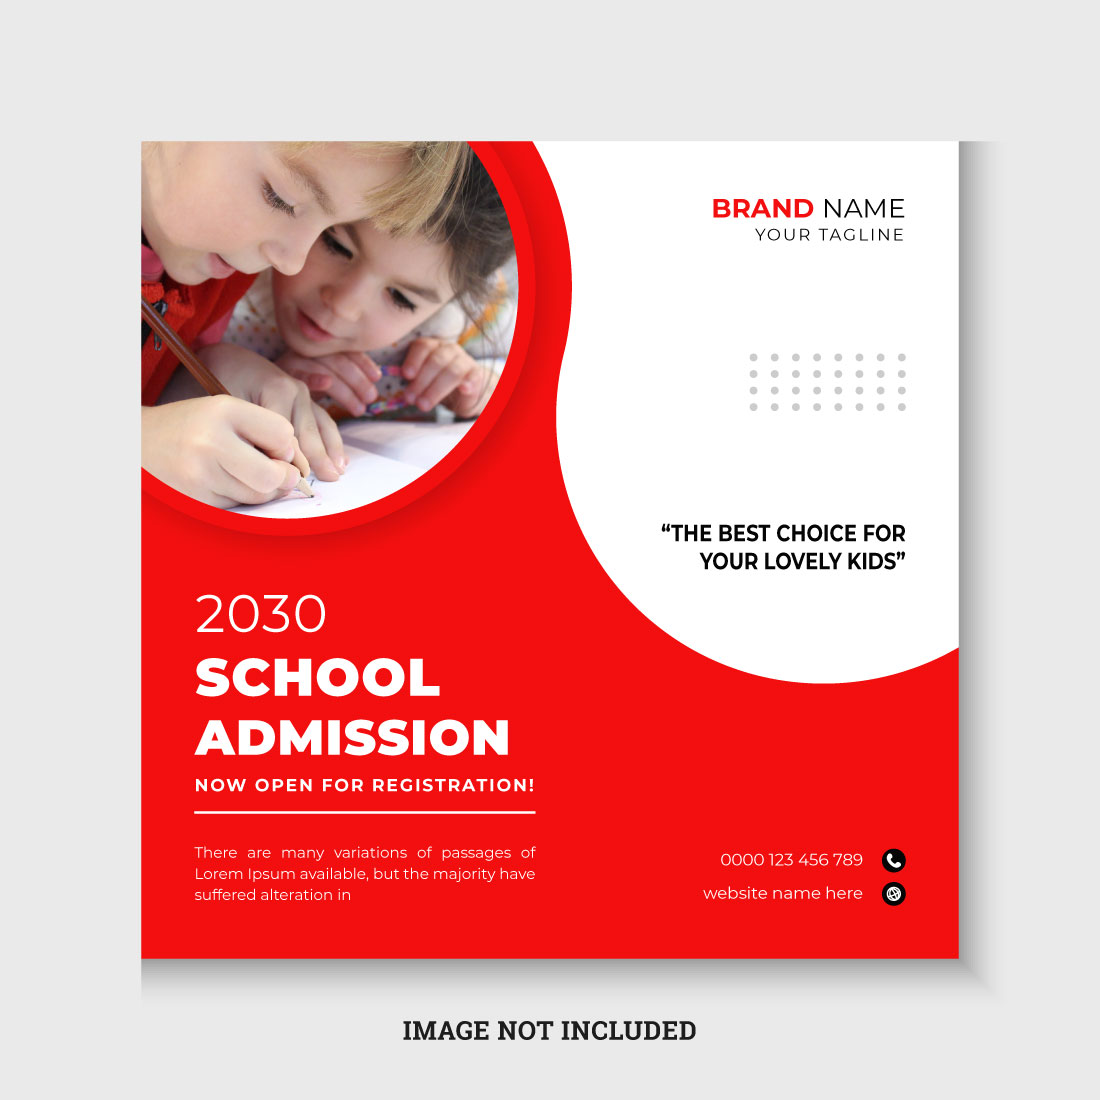 School admission square banner cover image.